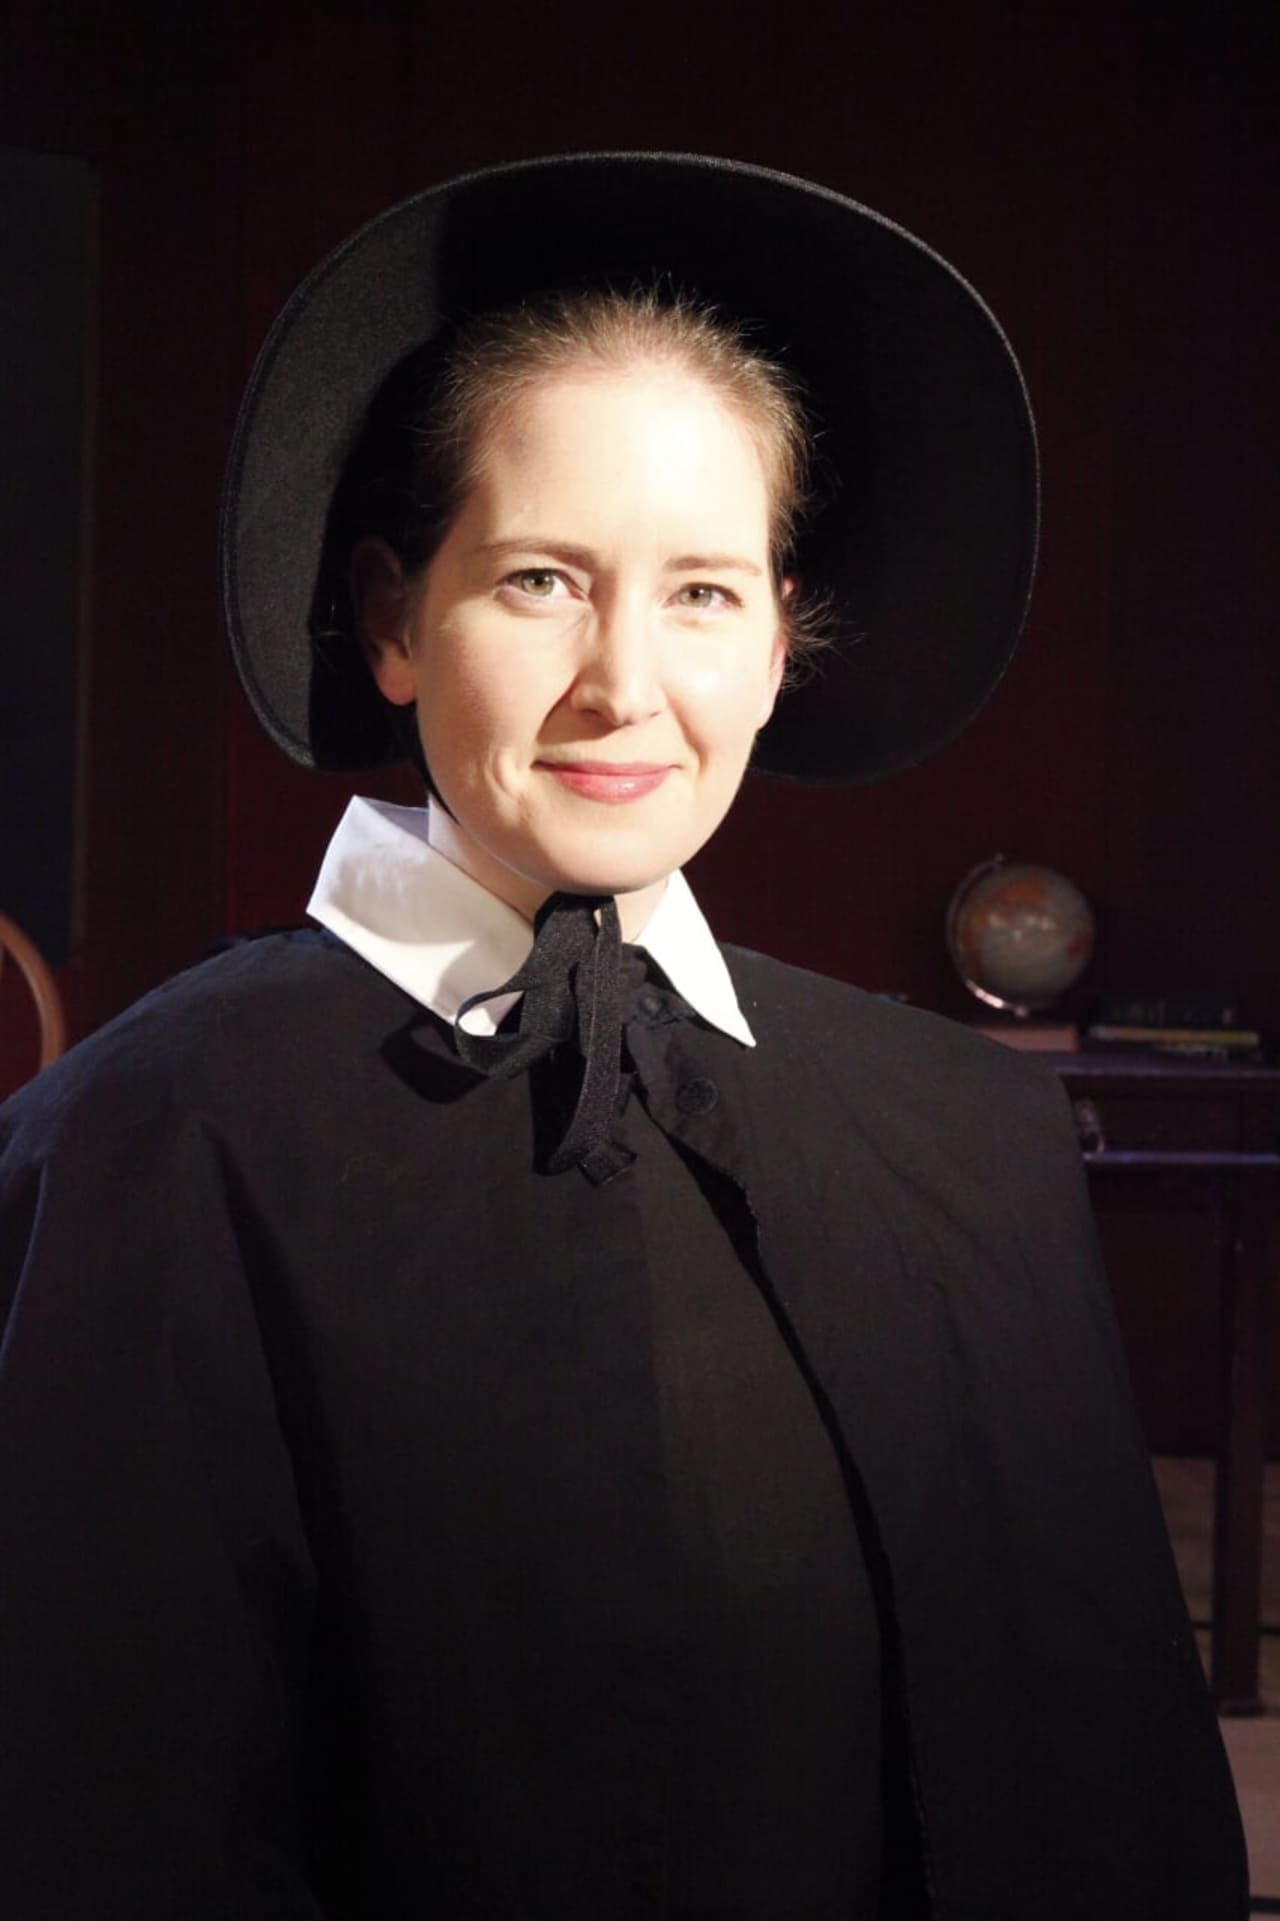 Trumbull resident Kristin Gagliardi portrays Sister James in "Doubt" opening Friday, Feb. 10 at the Westport Community Theatre.